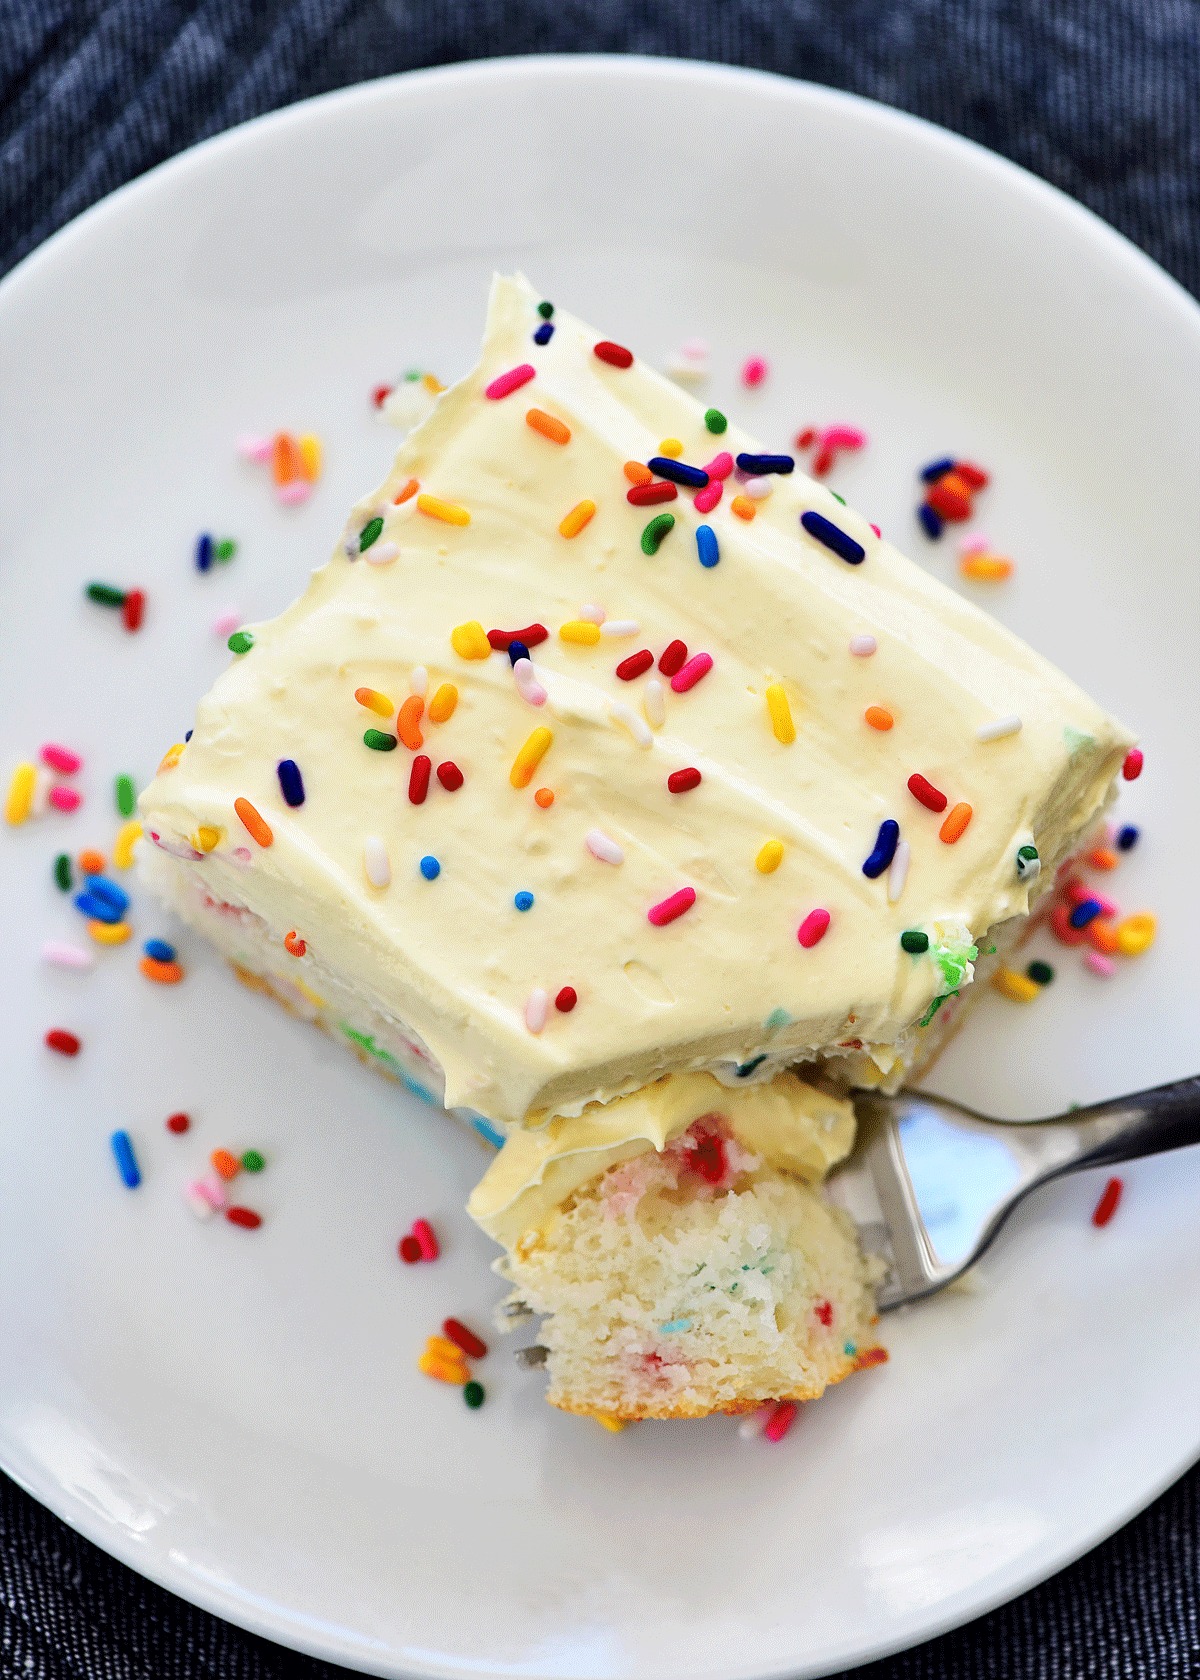 Skinny Funfetti Cake is a light, moist cake filled with sprinkles and lighter ingrediants. Life-in-the-Lofthouse.com